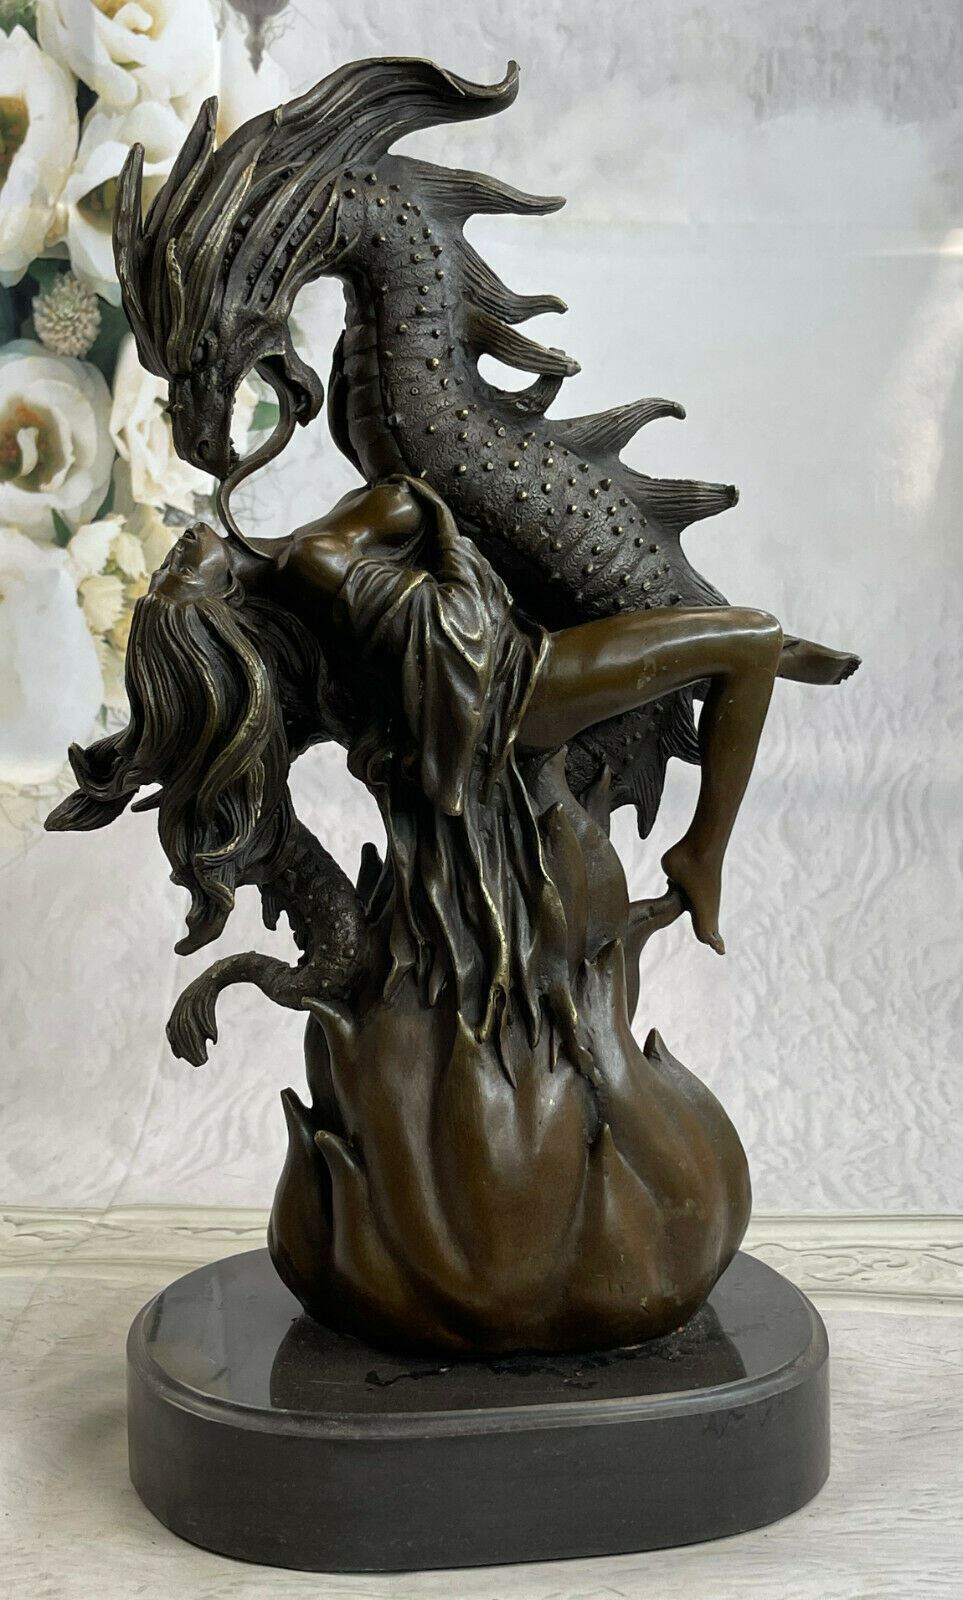 Absolutely Wonderful Burmese Marble Sculpture featuring a Dragon Warrior Female